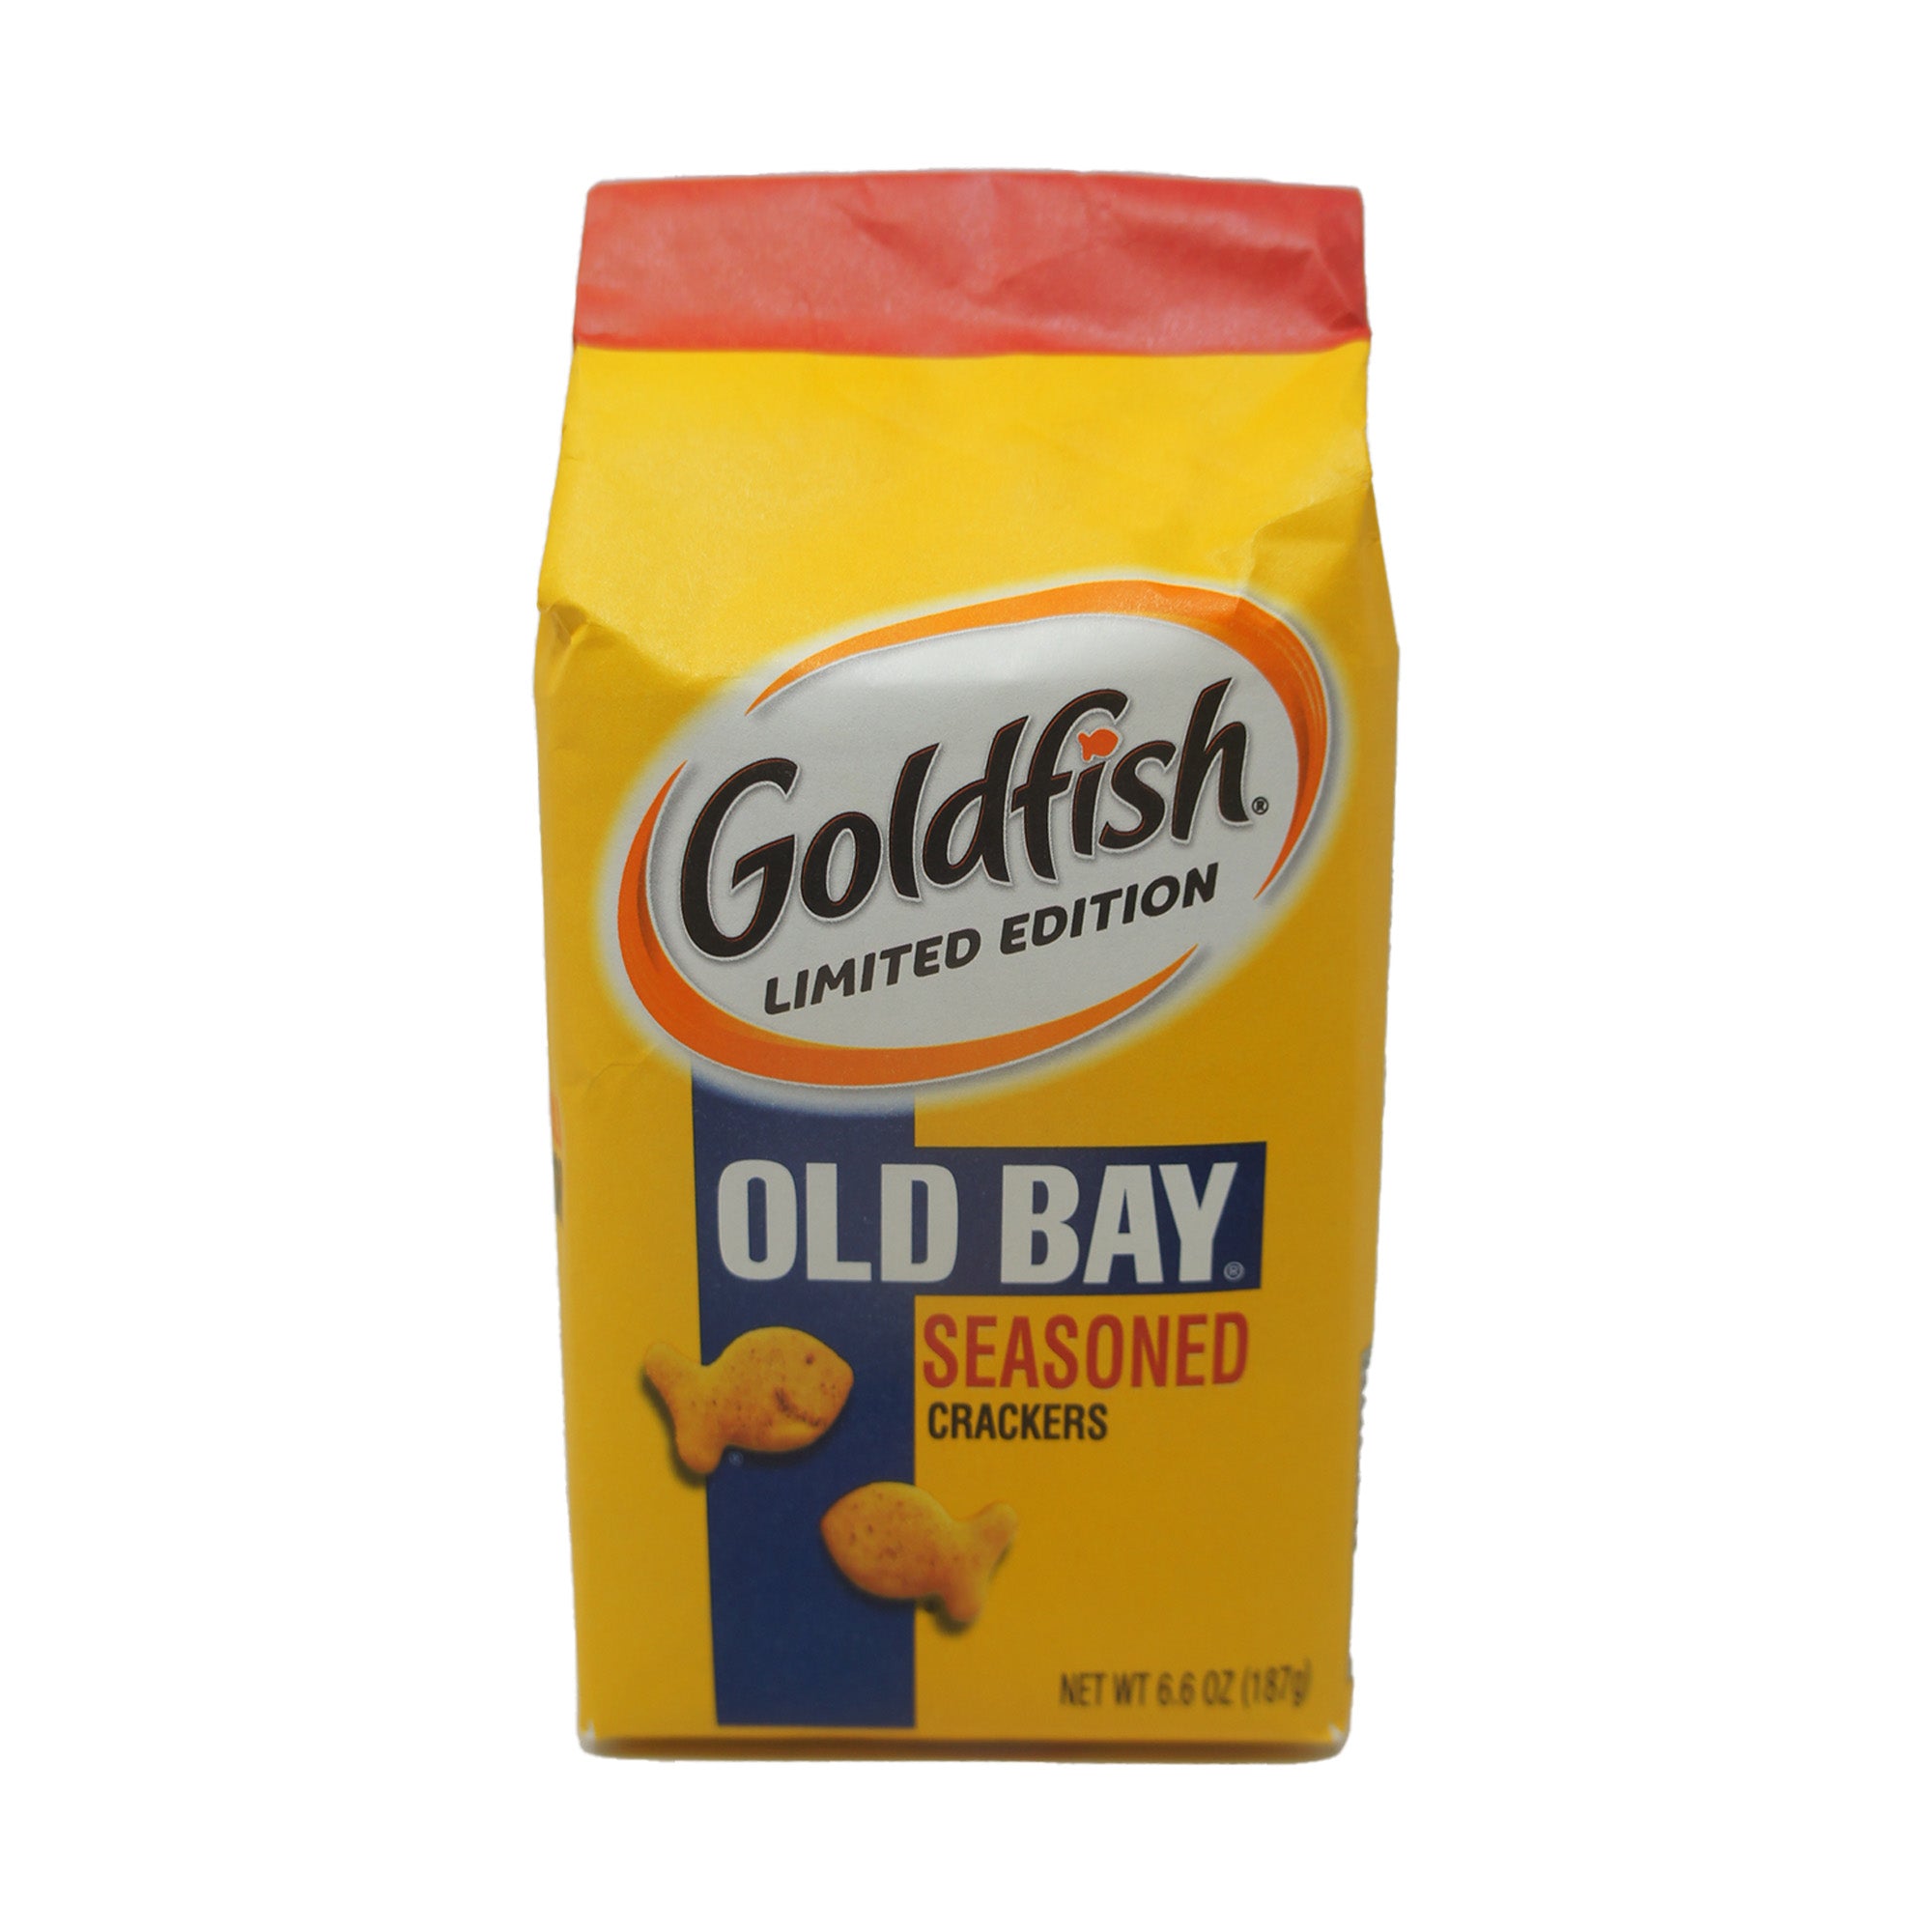 Goldfish Crackers, Old Bay Seasoned, Limited Edition, 6.6 oz per Pack